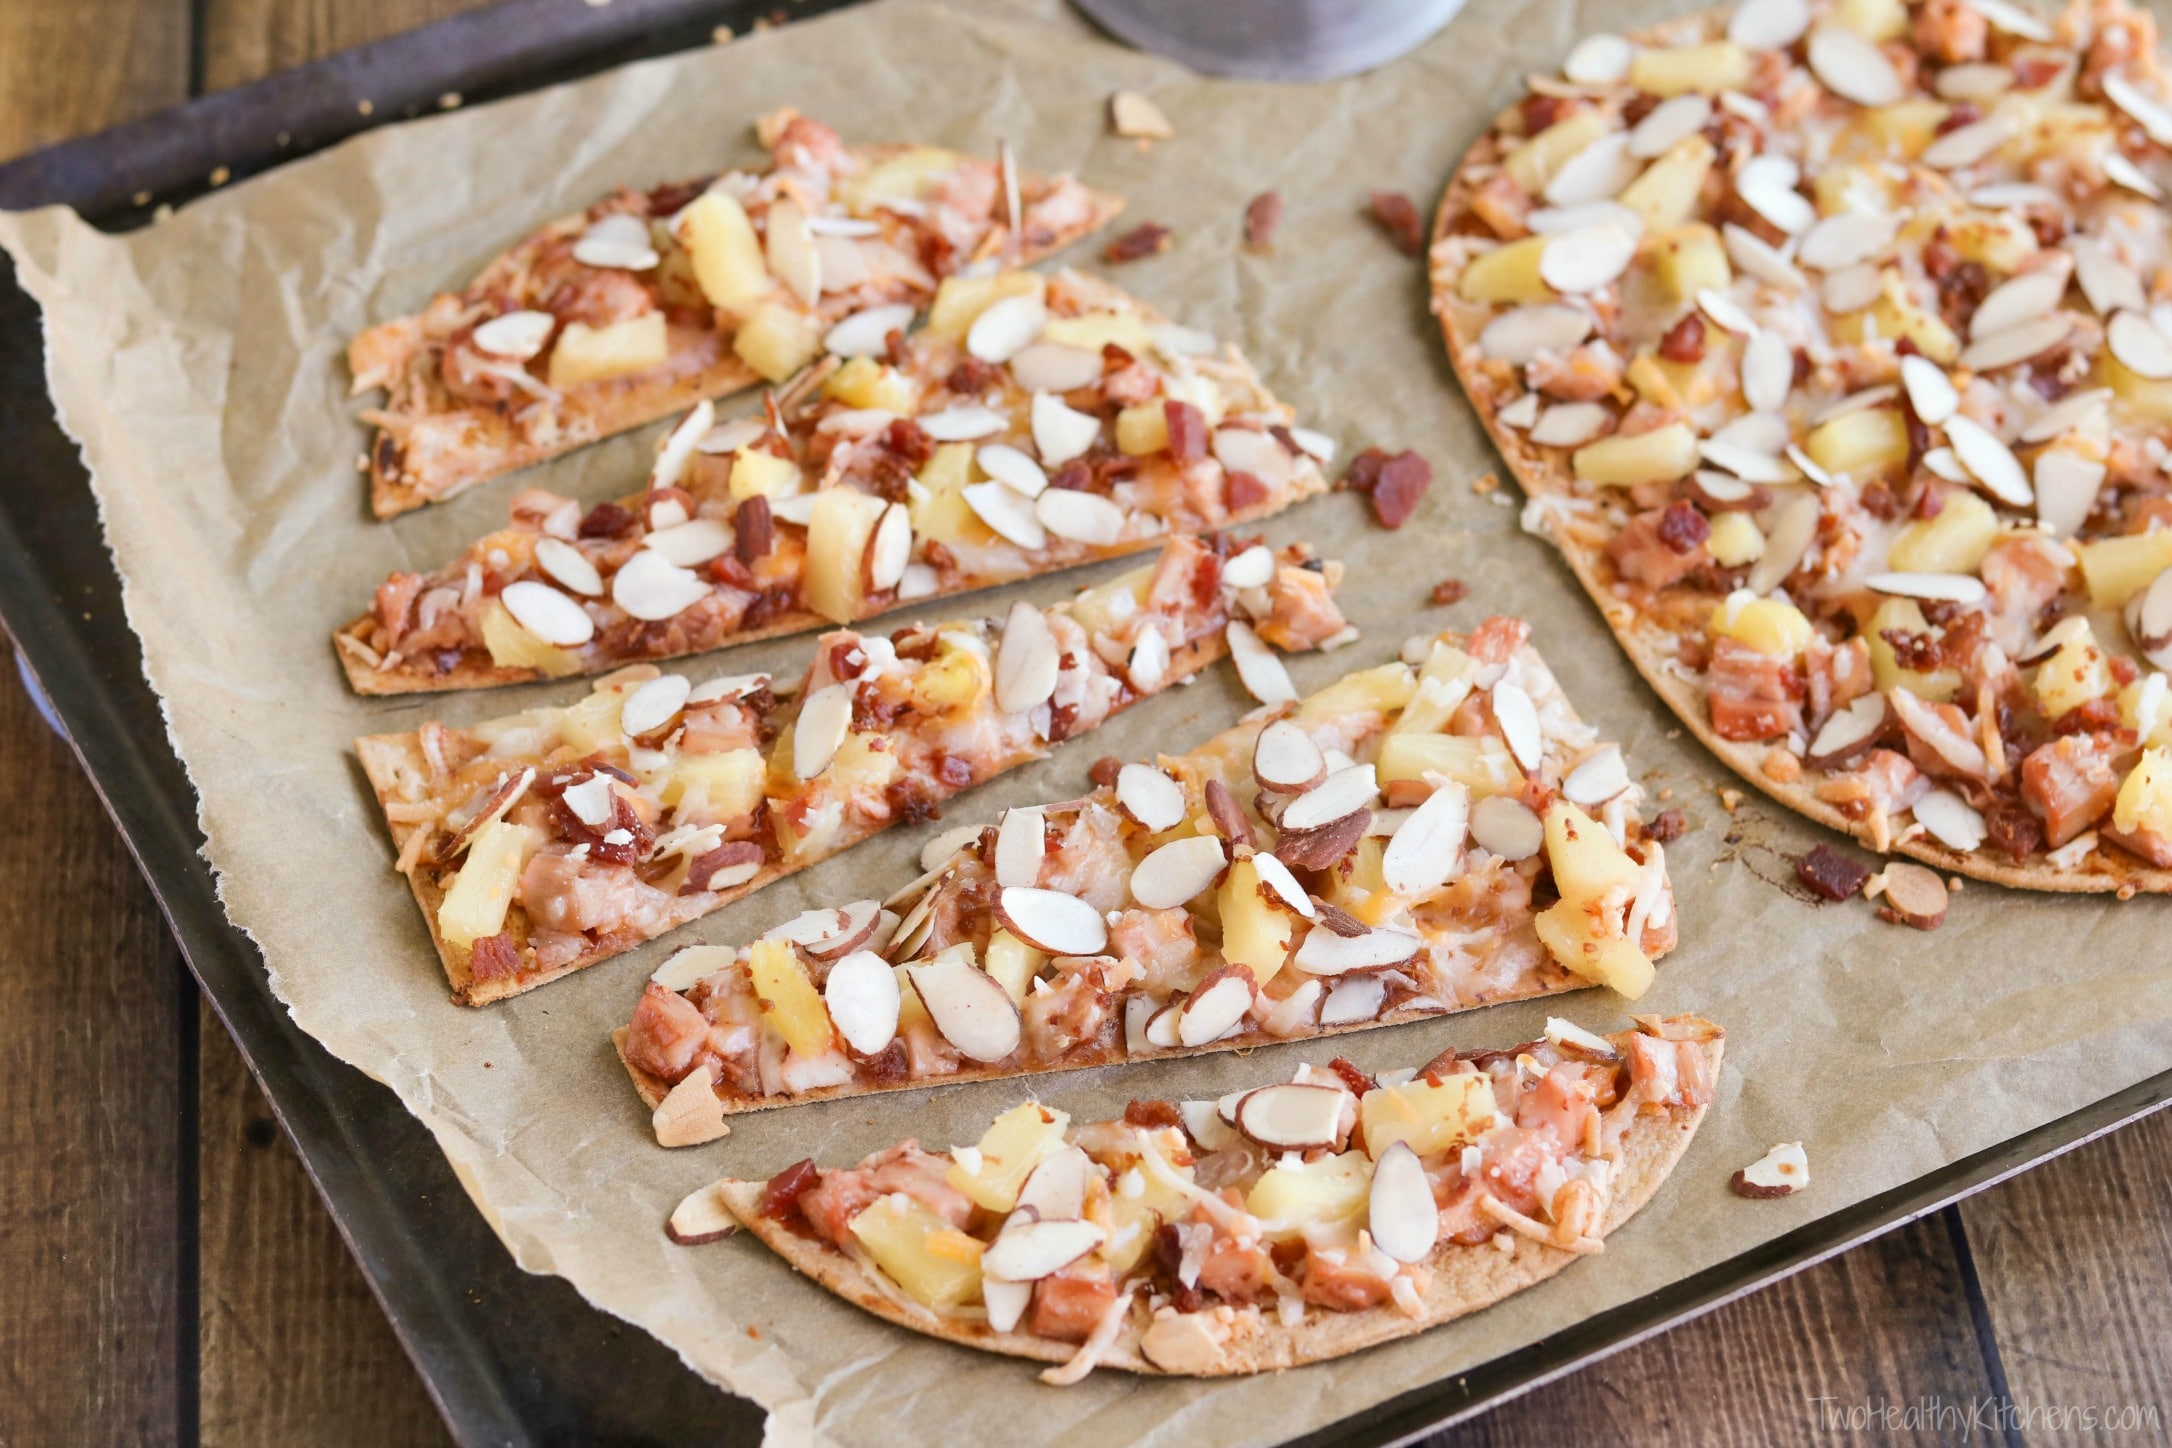 This Sweet and Sour Chicken Flatbread Pizza is so many awesome things in one! It’s like your favorite Chinese sweet and sour chicken met up with a BBQ chicken pizza … all on top of a crispy flatbread crust! Bonus: it’s ready in way under 30 minutes! {ad} | www.TwoHealthyKitchens.com